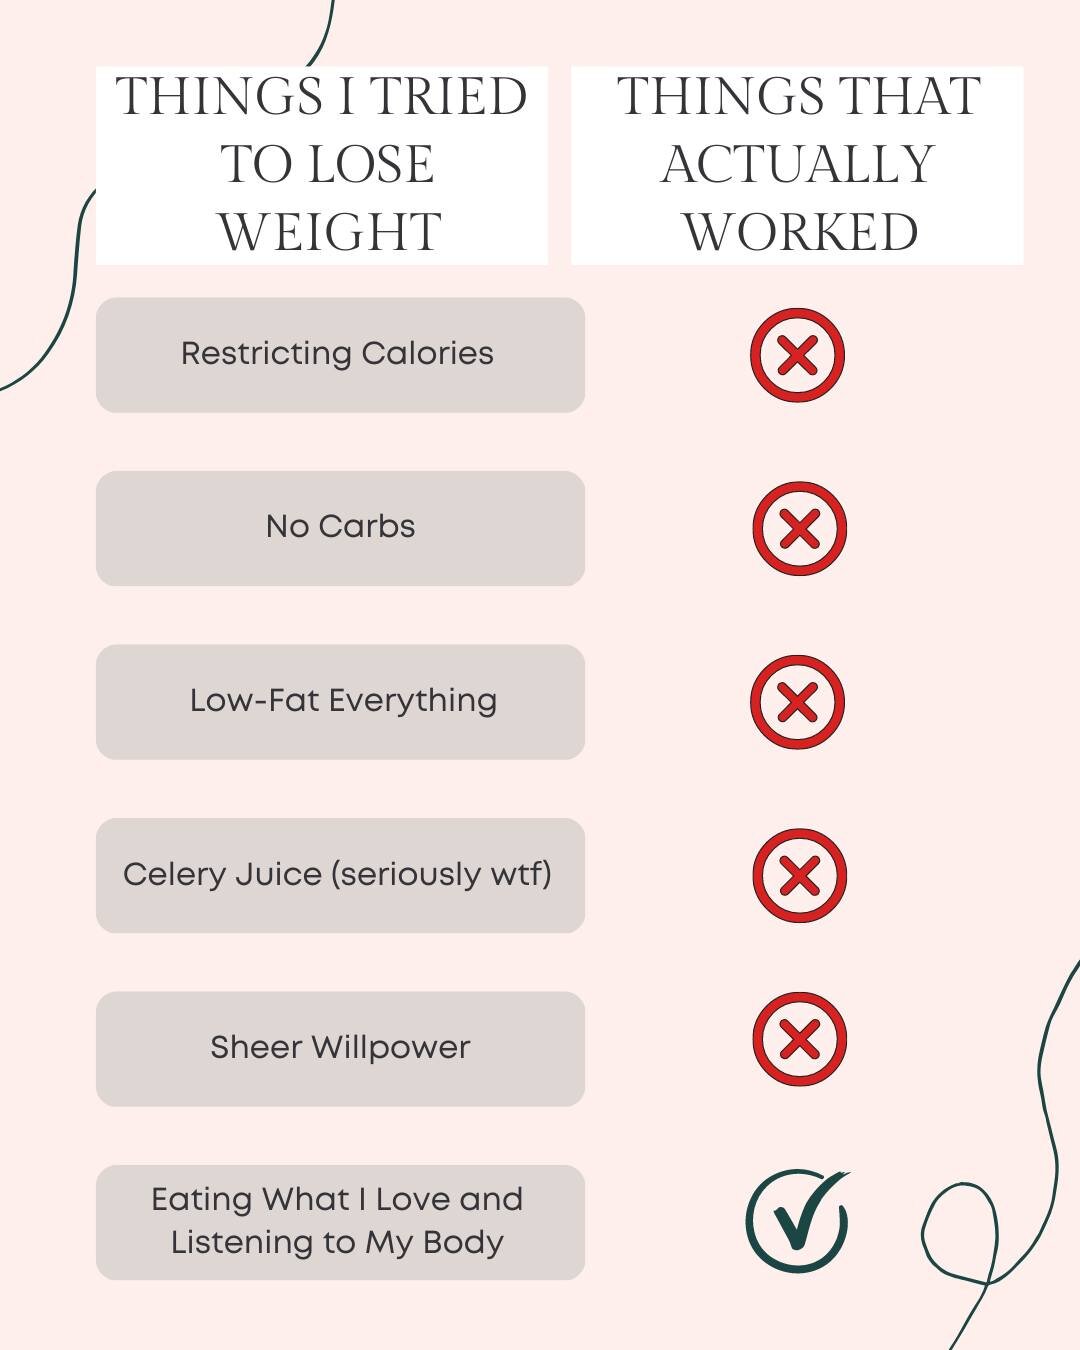 I wish I'd found out sooner that I could lose weight simply by figuring out how to listen to my body's hunger and satiety cues - it would have saved me from so many sad meals.

I hate the idea of so many women suffering through shitty diet food, so I